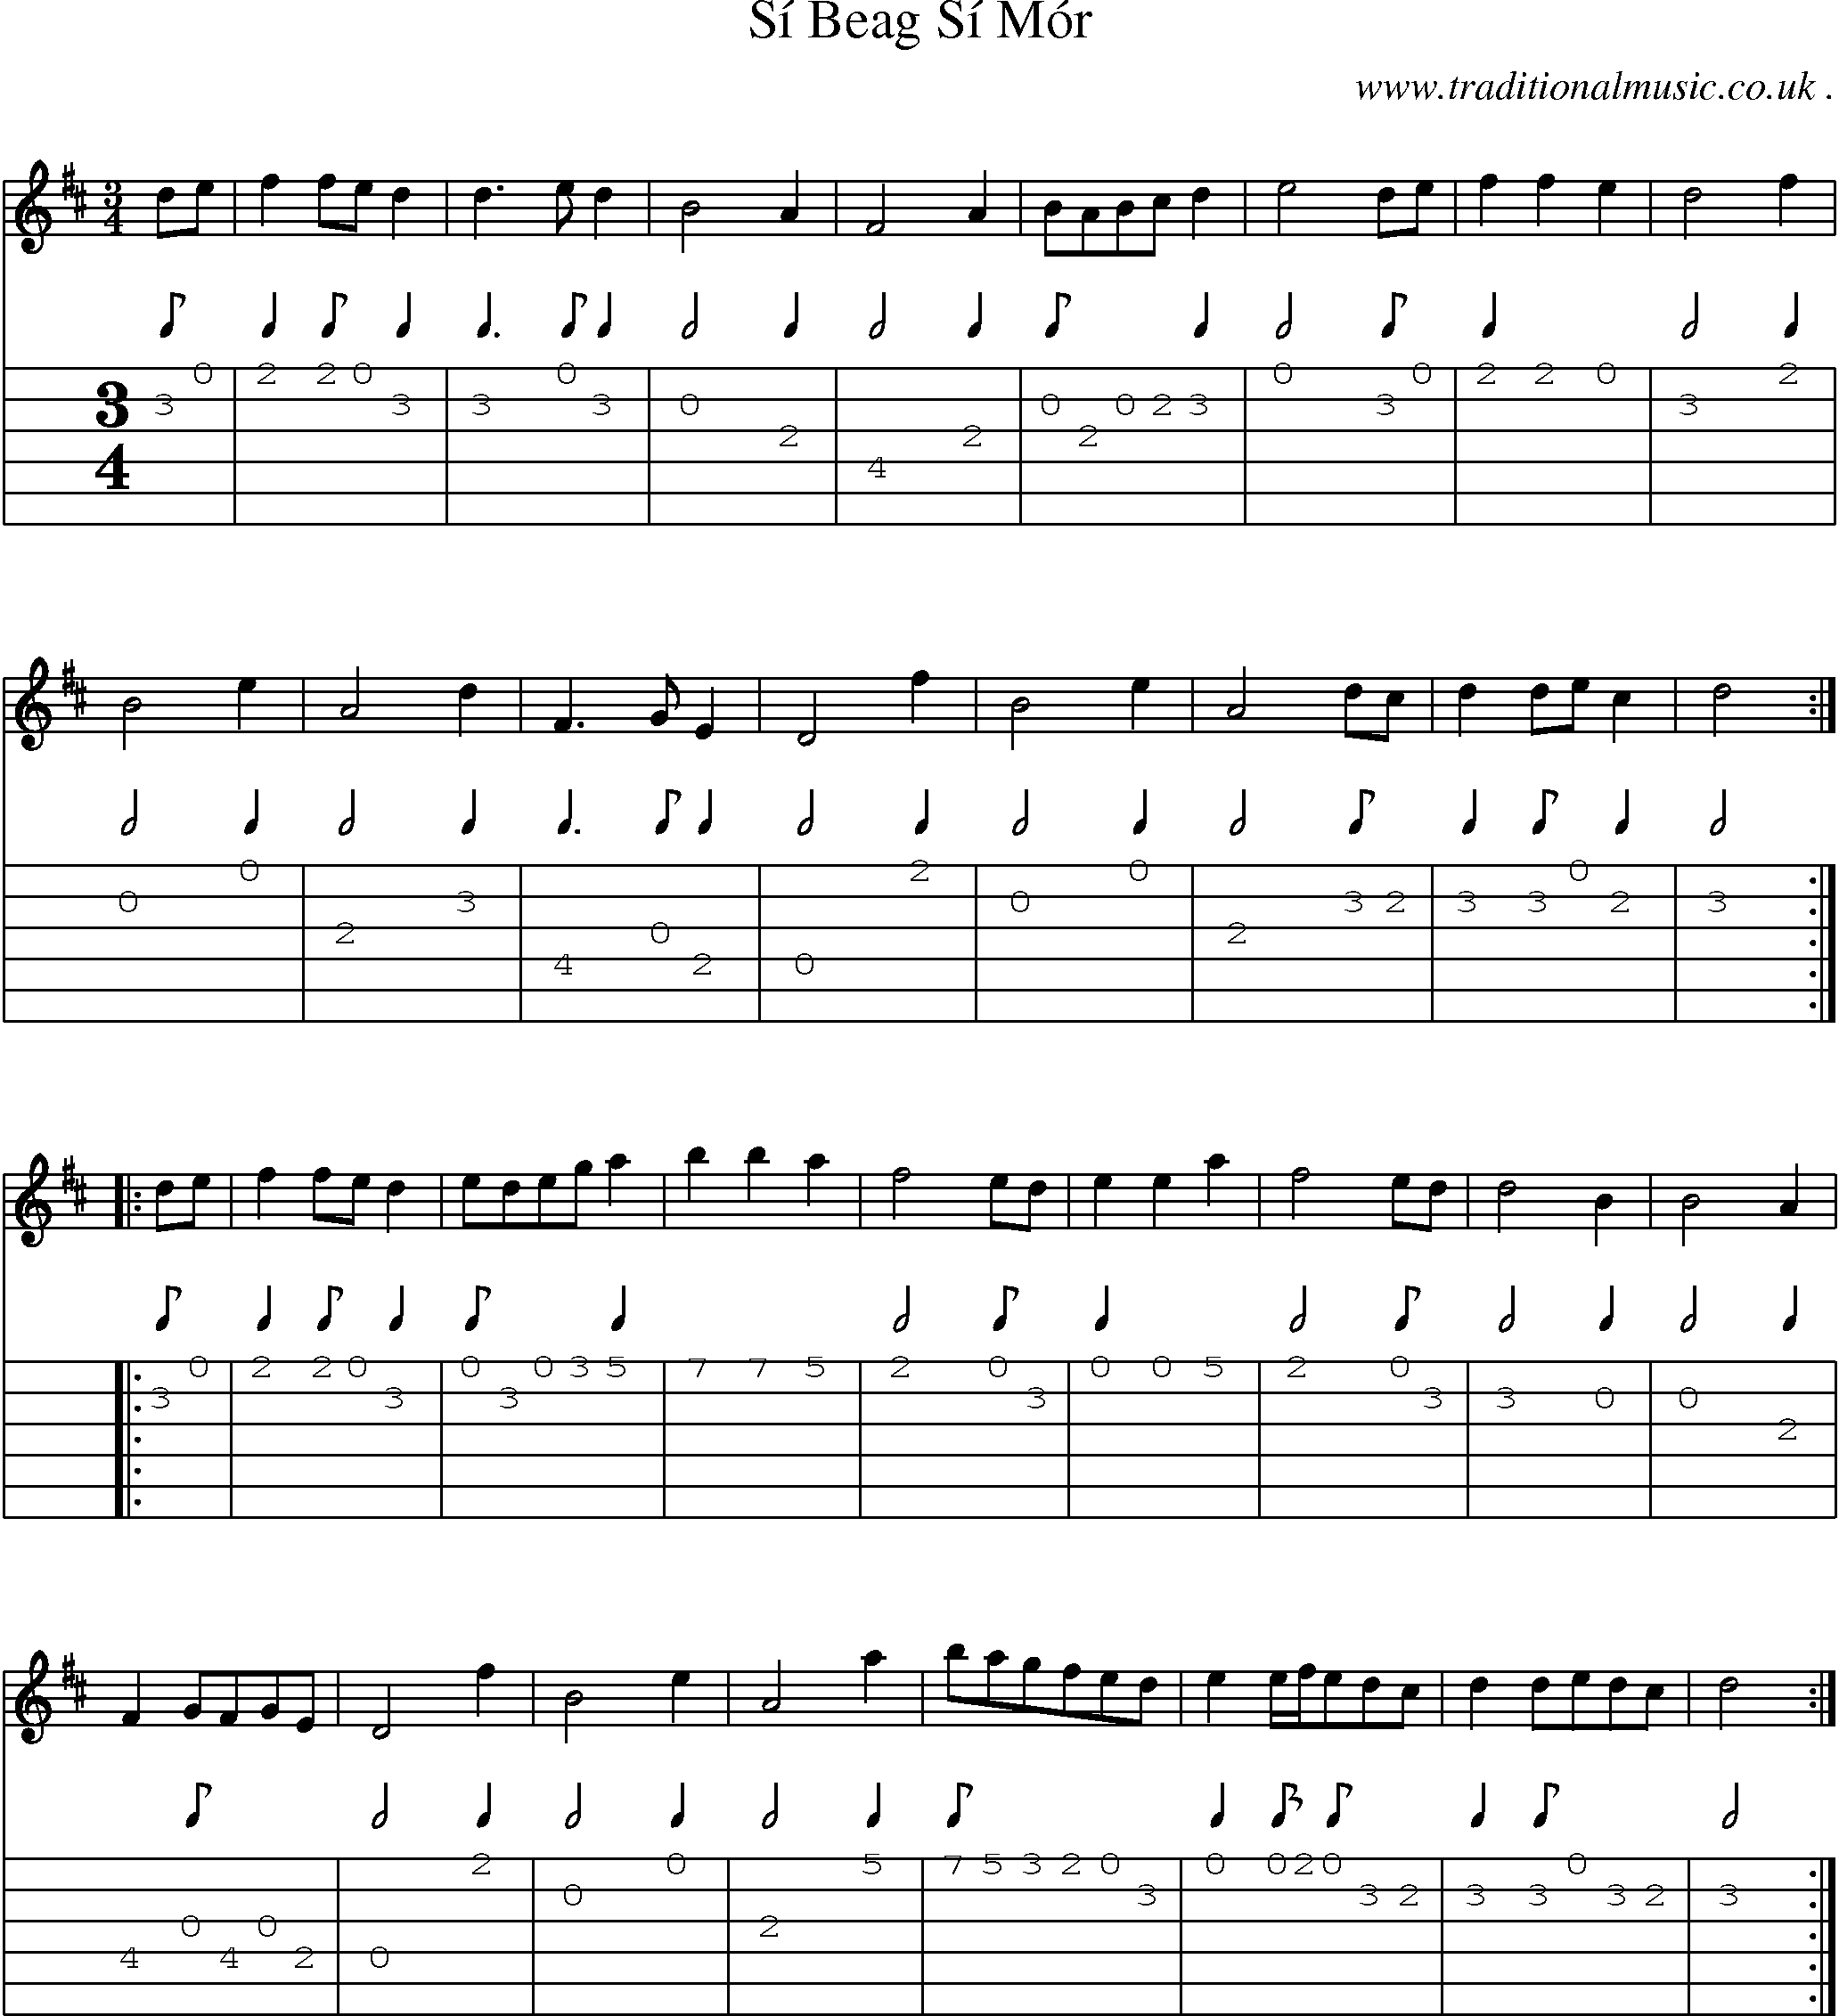 Sheet-Music and Guitar Tabs for Si Beag Si Mor